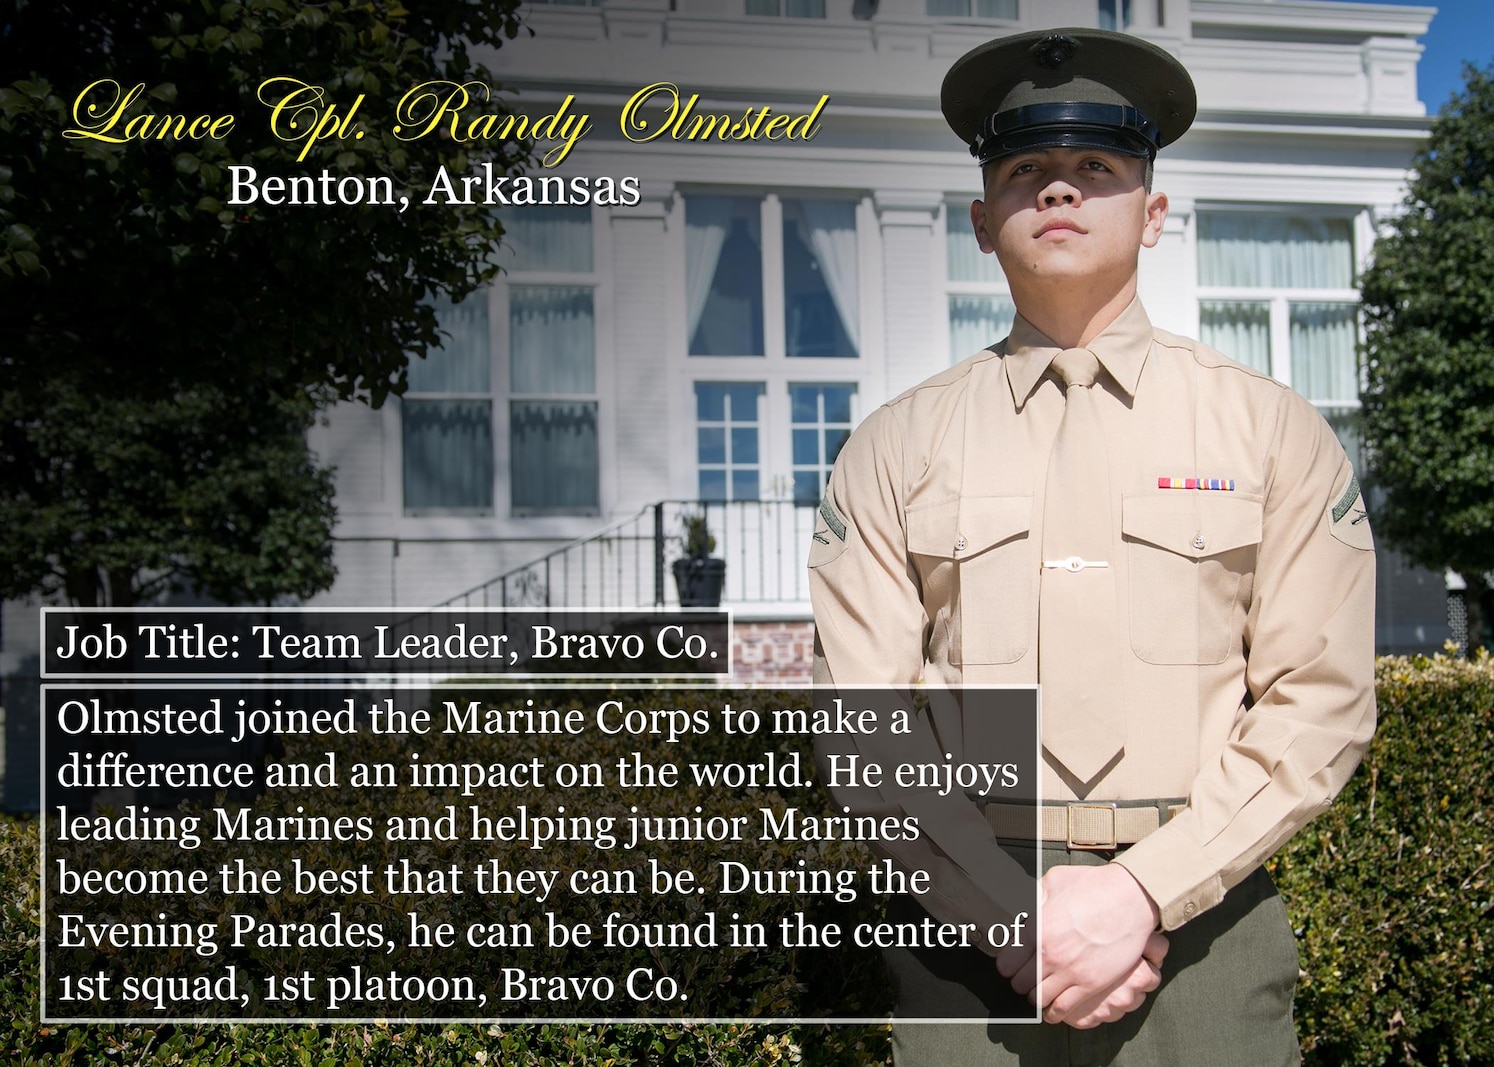 Lance Cpl. Randy Olmsted
Benton, Ark.
Job Title: Team Leader, Bravo Co.
Olmsted joined the Marine Corps to make a difference and an impact on the world. He enjoys leading Marines and helping junior Marines become the best that they can be. During the Evening Parades, he can be found in the center of 1st squad, 1st platoon, Bravo Co.
(Official Marine Corps photo by Cpl. Chi Nguyen/Released)